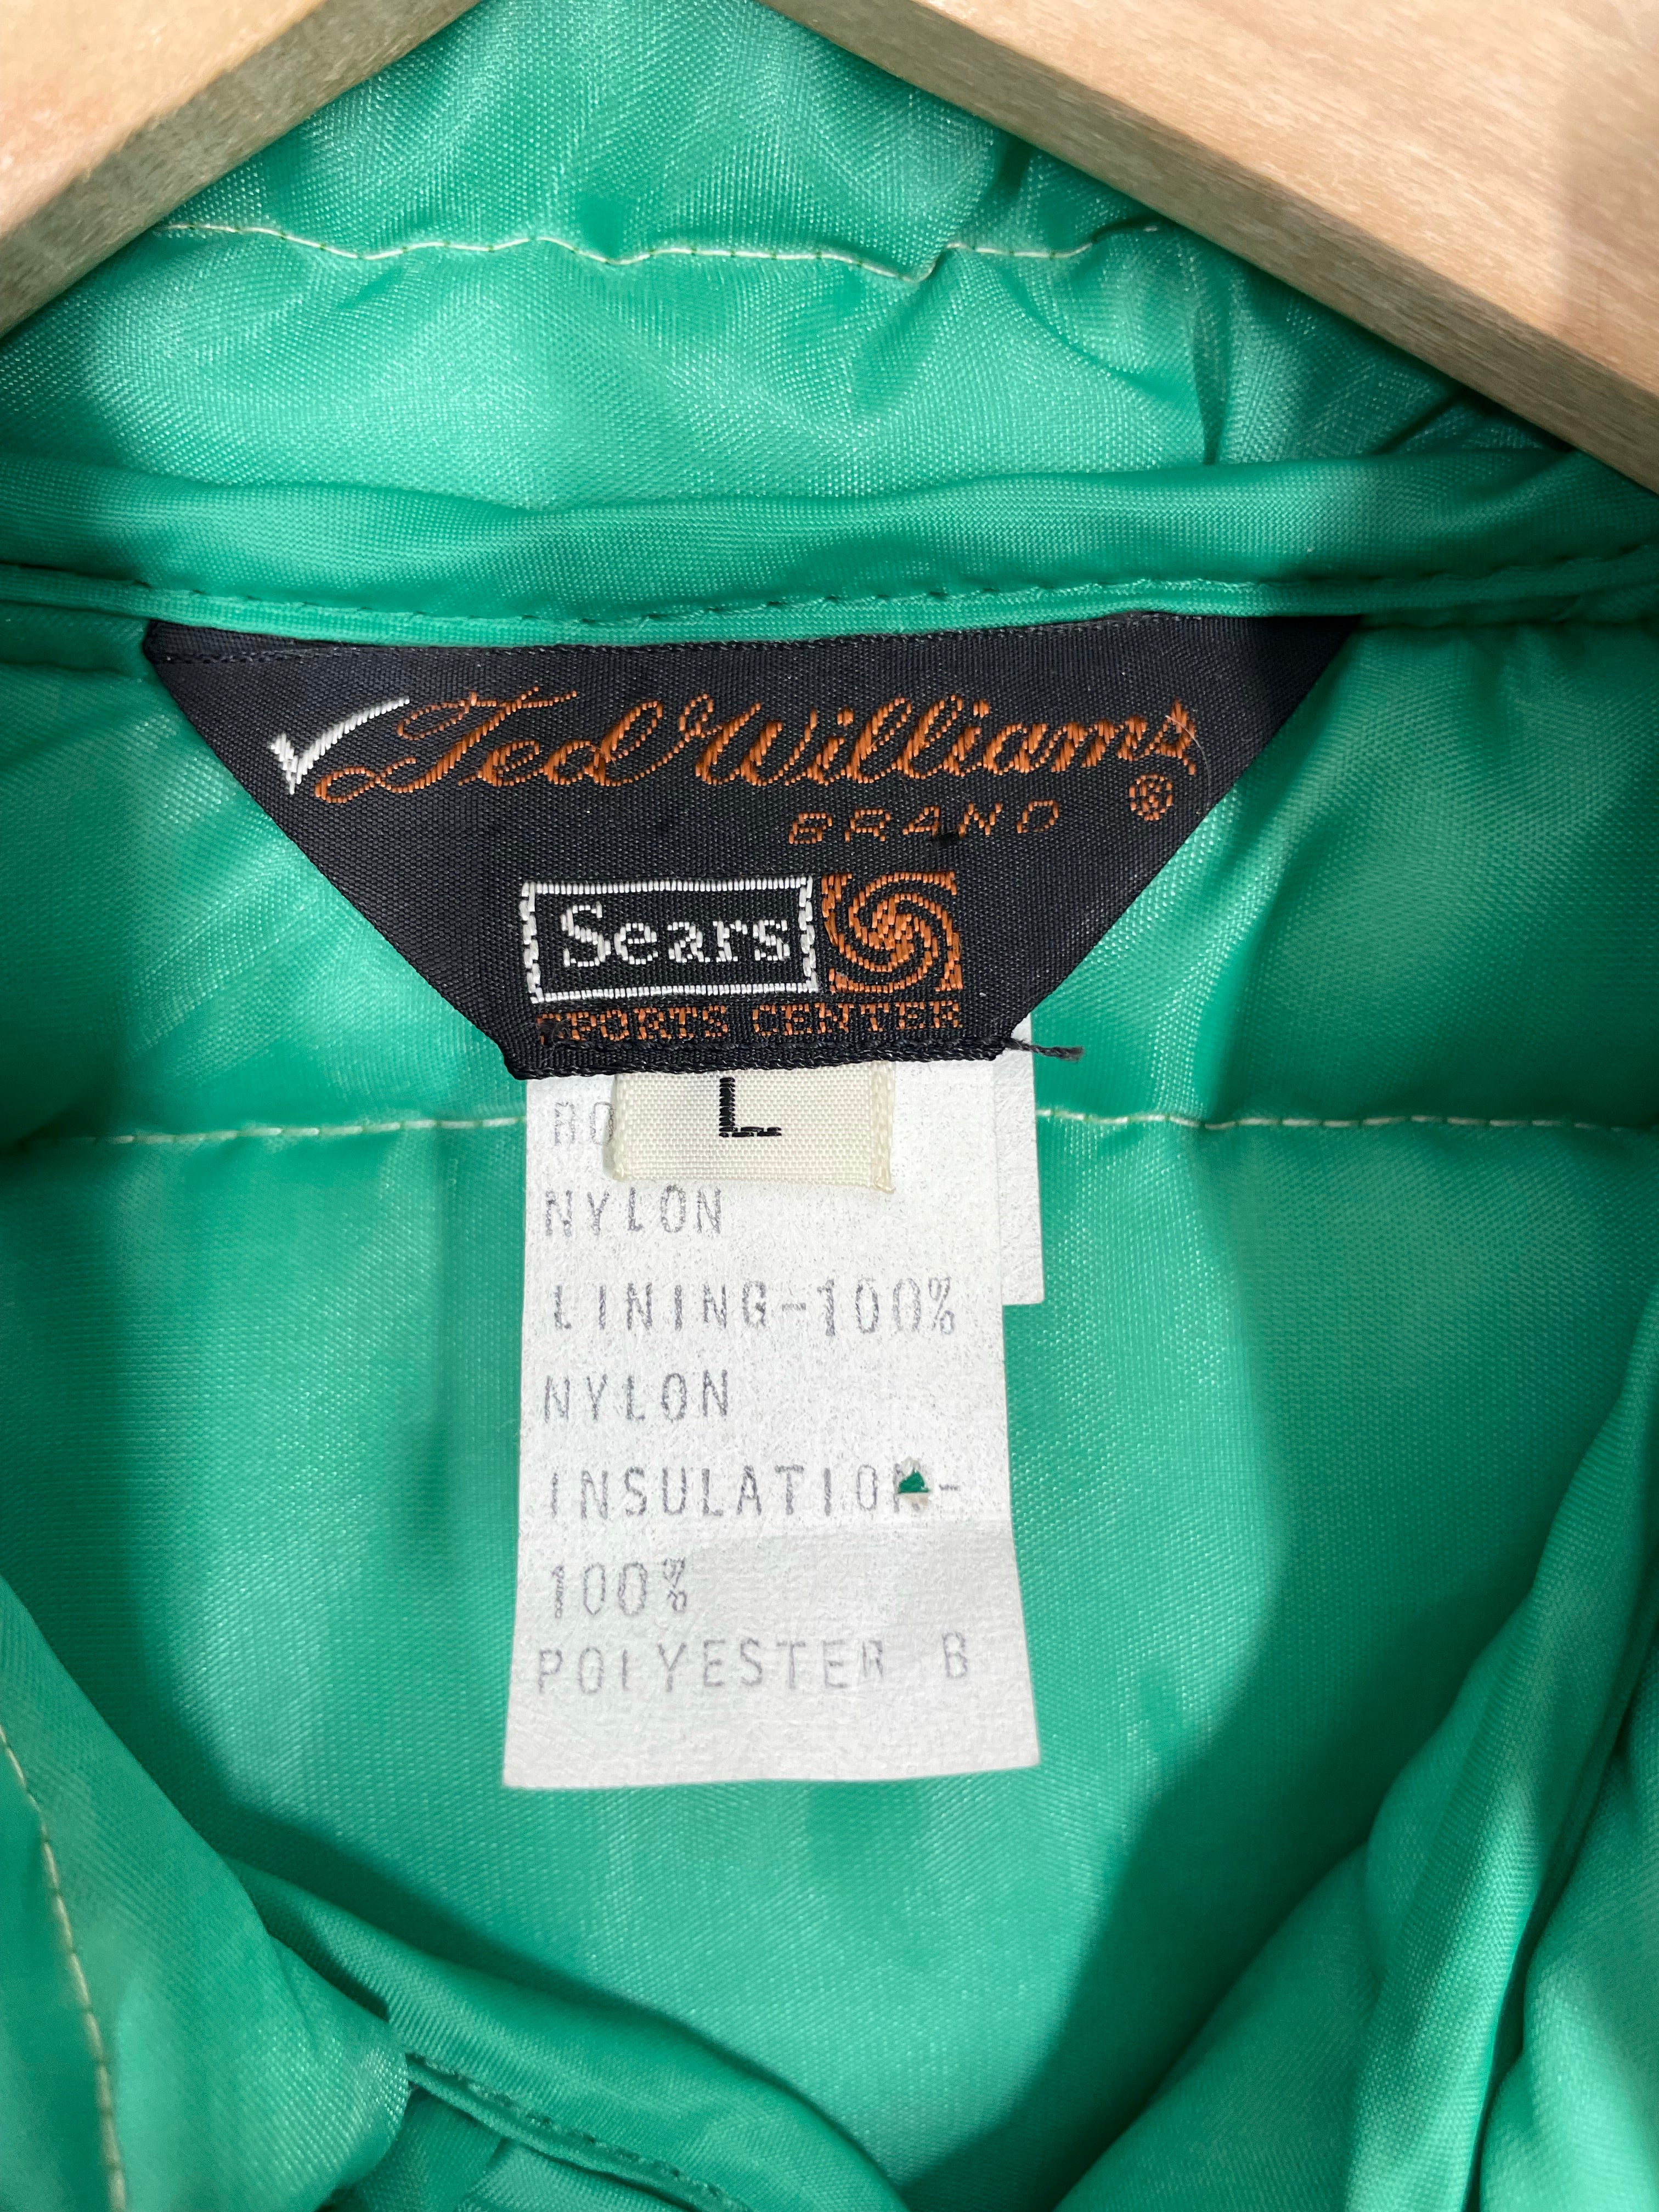 Ted Williams Brand Puffer Vest - Sears - L